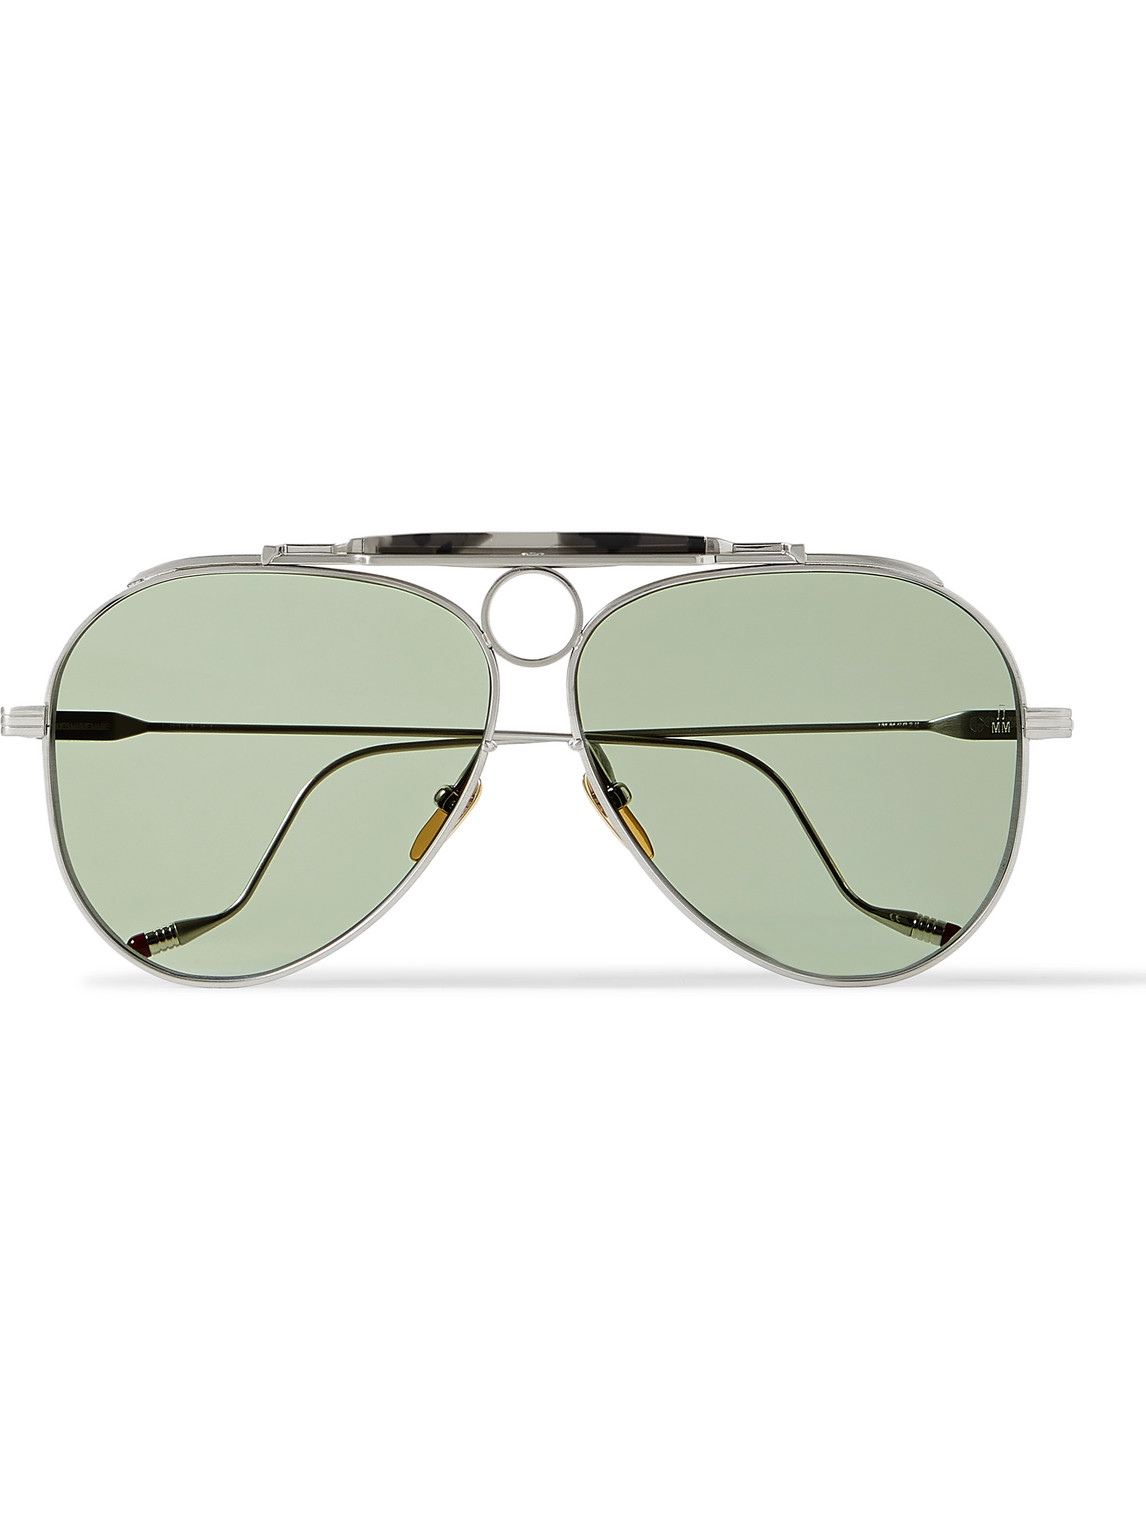 Jacques Marie Mage The Gonzo Foundation Duke Aviator-style Tortoiseshell Acetate And Silver-tone Sunglasses In Gold